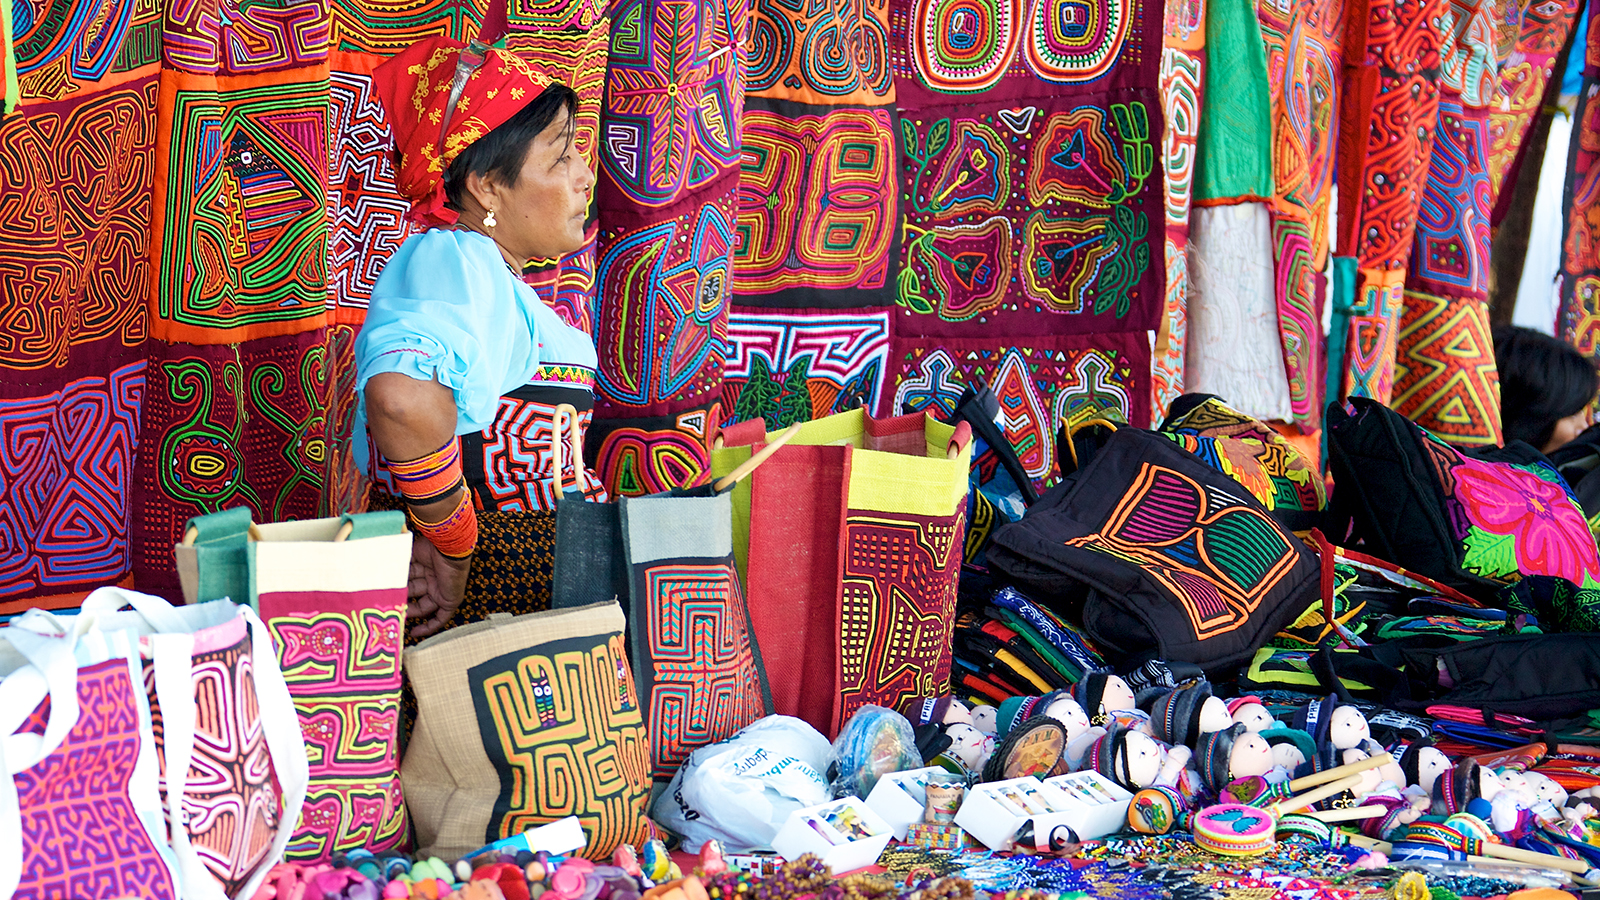 PANAMA CITY, PANAMA - JANUARY 18, 2014: A Kuna woman selling molas in an open air market in Panama City. The Kuna people, also known as Guna, are indigenous people of Panama and Colombia. ; Shutterstock ID 180144593; PO: BB: Country Photos for Website